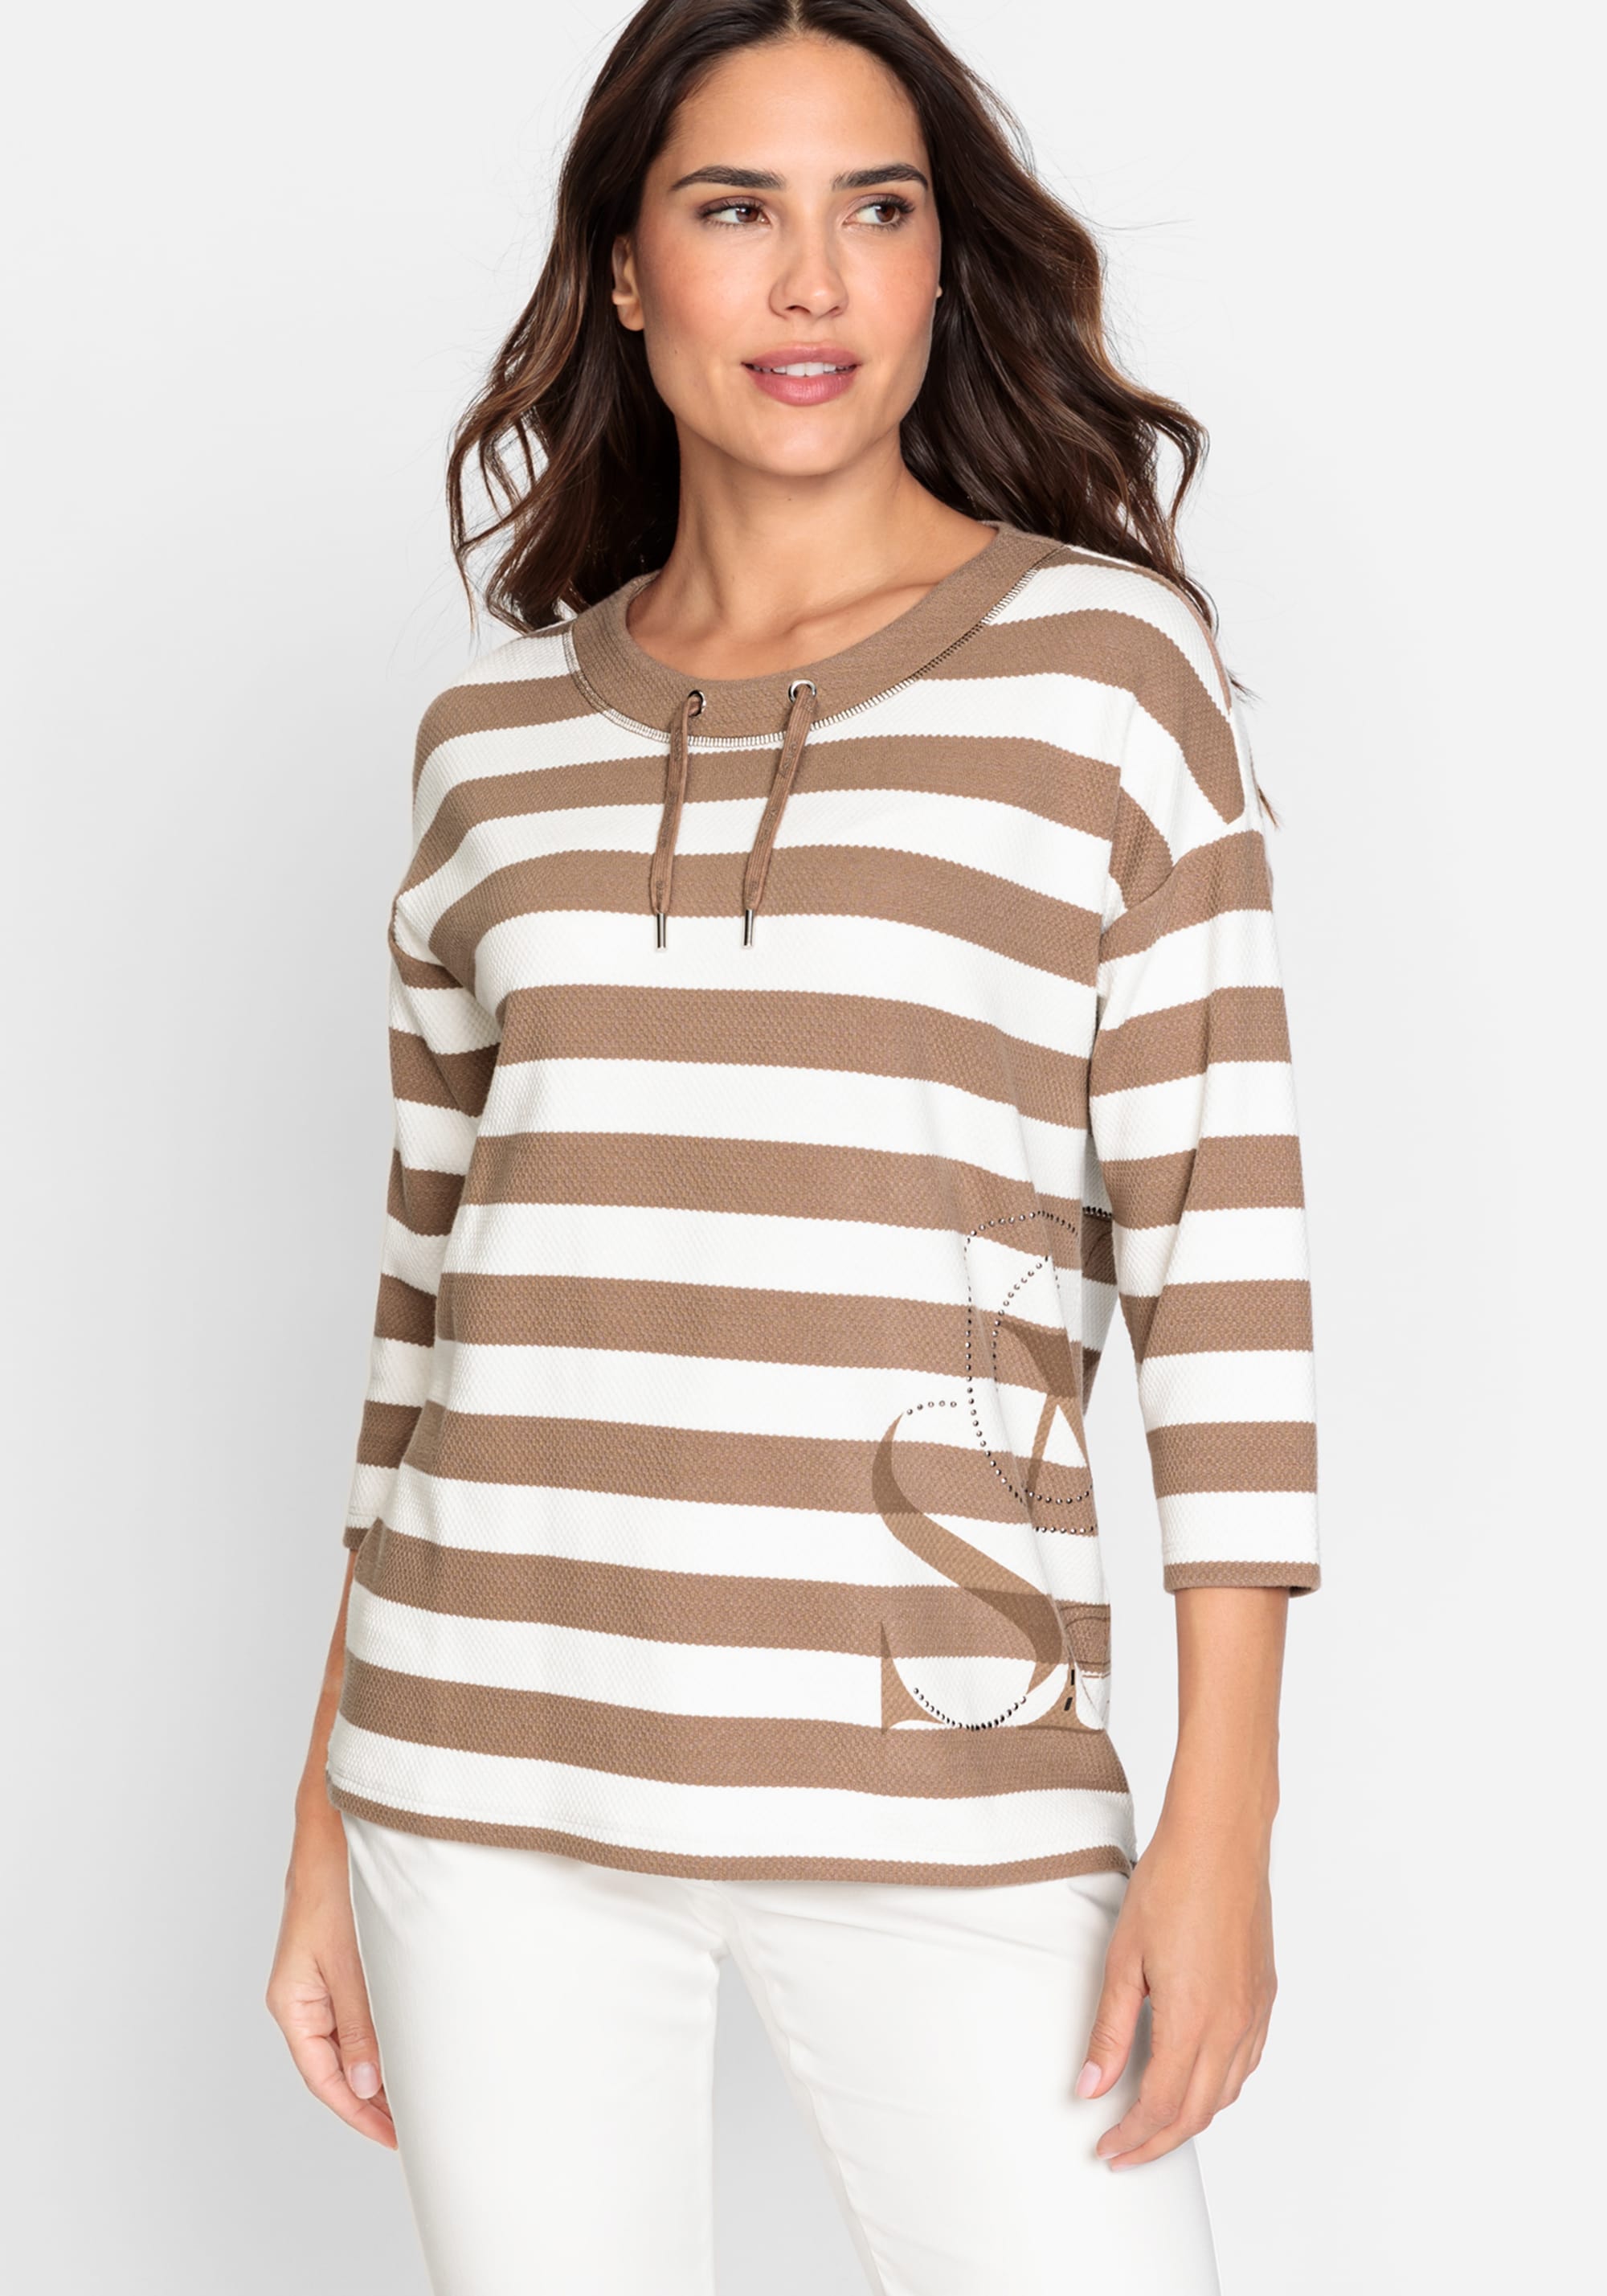 Cotton Blend 3/4 Sleeve Waffle Knit Jersey Top - Olsen Fashion Canada